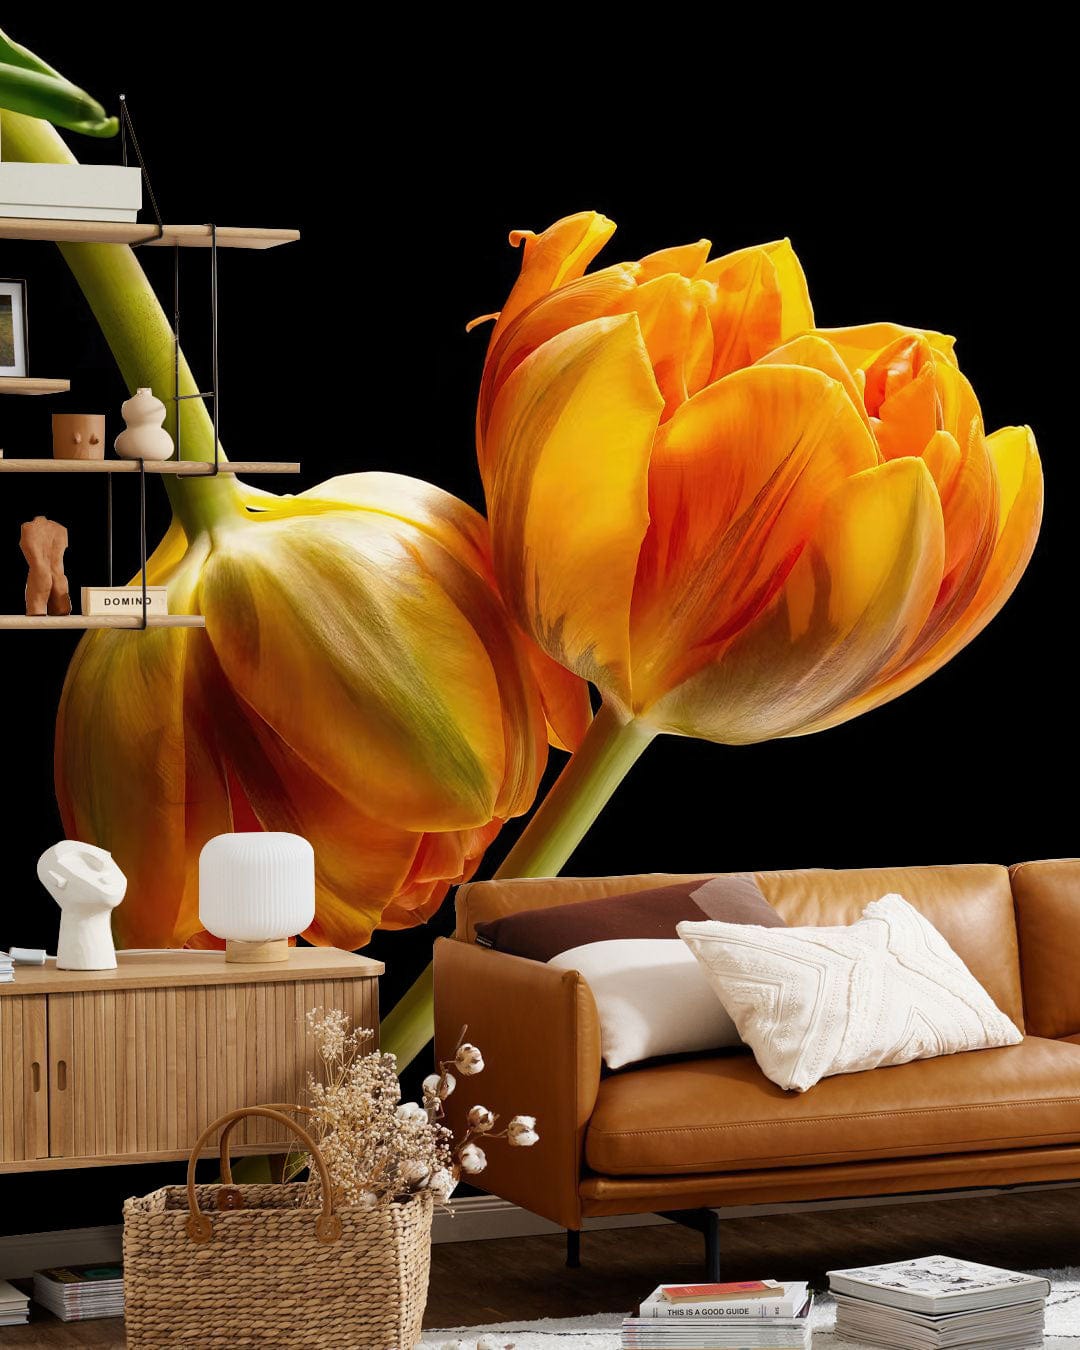 Wallpaper mural with Blooming Tulips, perfect for use in Decorating the Living Room